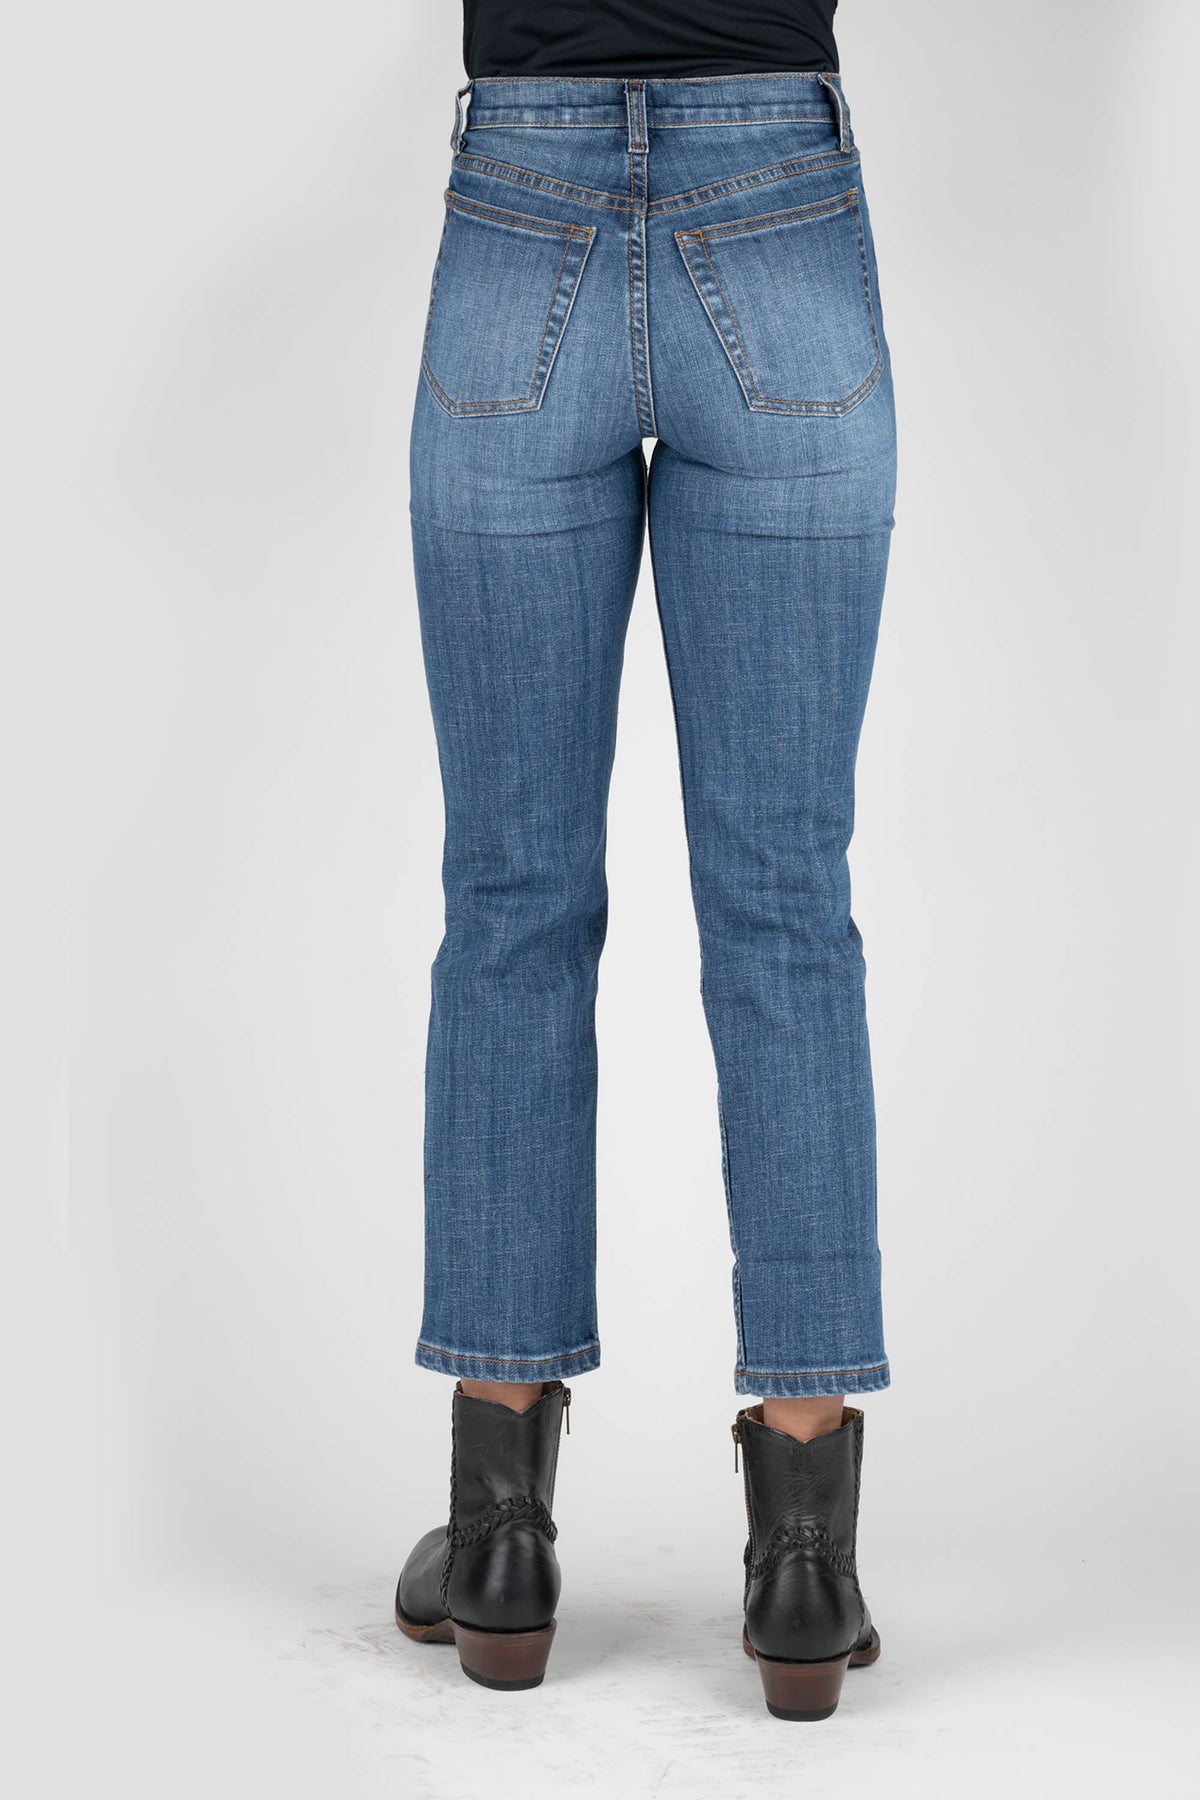 Tin Haul WOMENS HIGHRISE STRAIGHT CROP JEANS